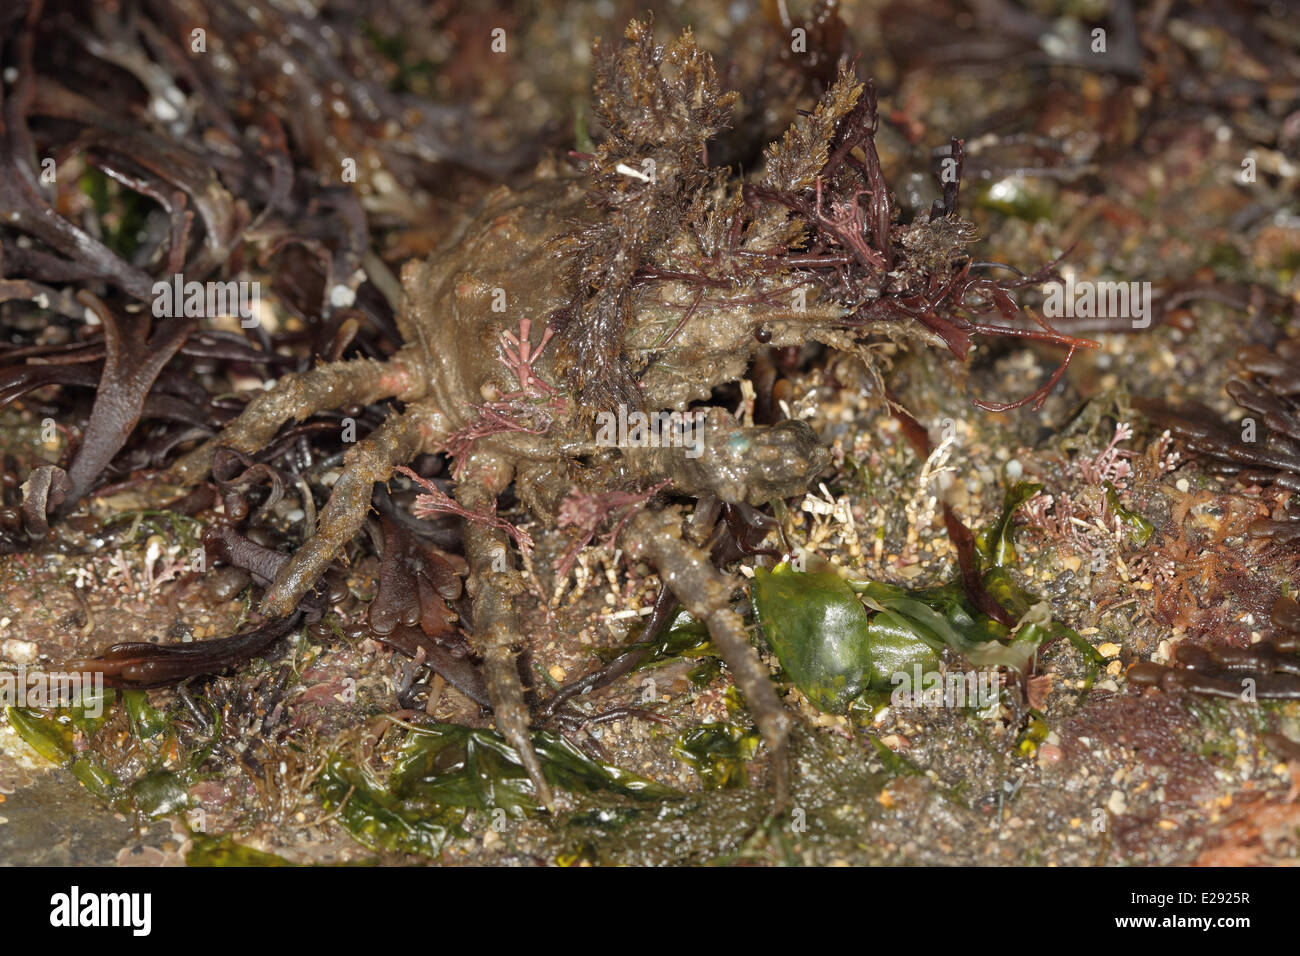 Four-horned Spider Crab (Pisa tetraodon) adult, Kimmeridge, Isle of Purbeck, Dorset, England, March Stock Photo